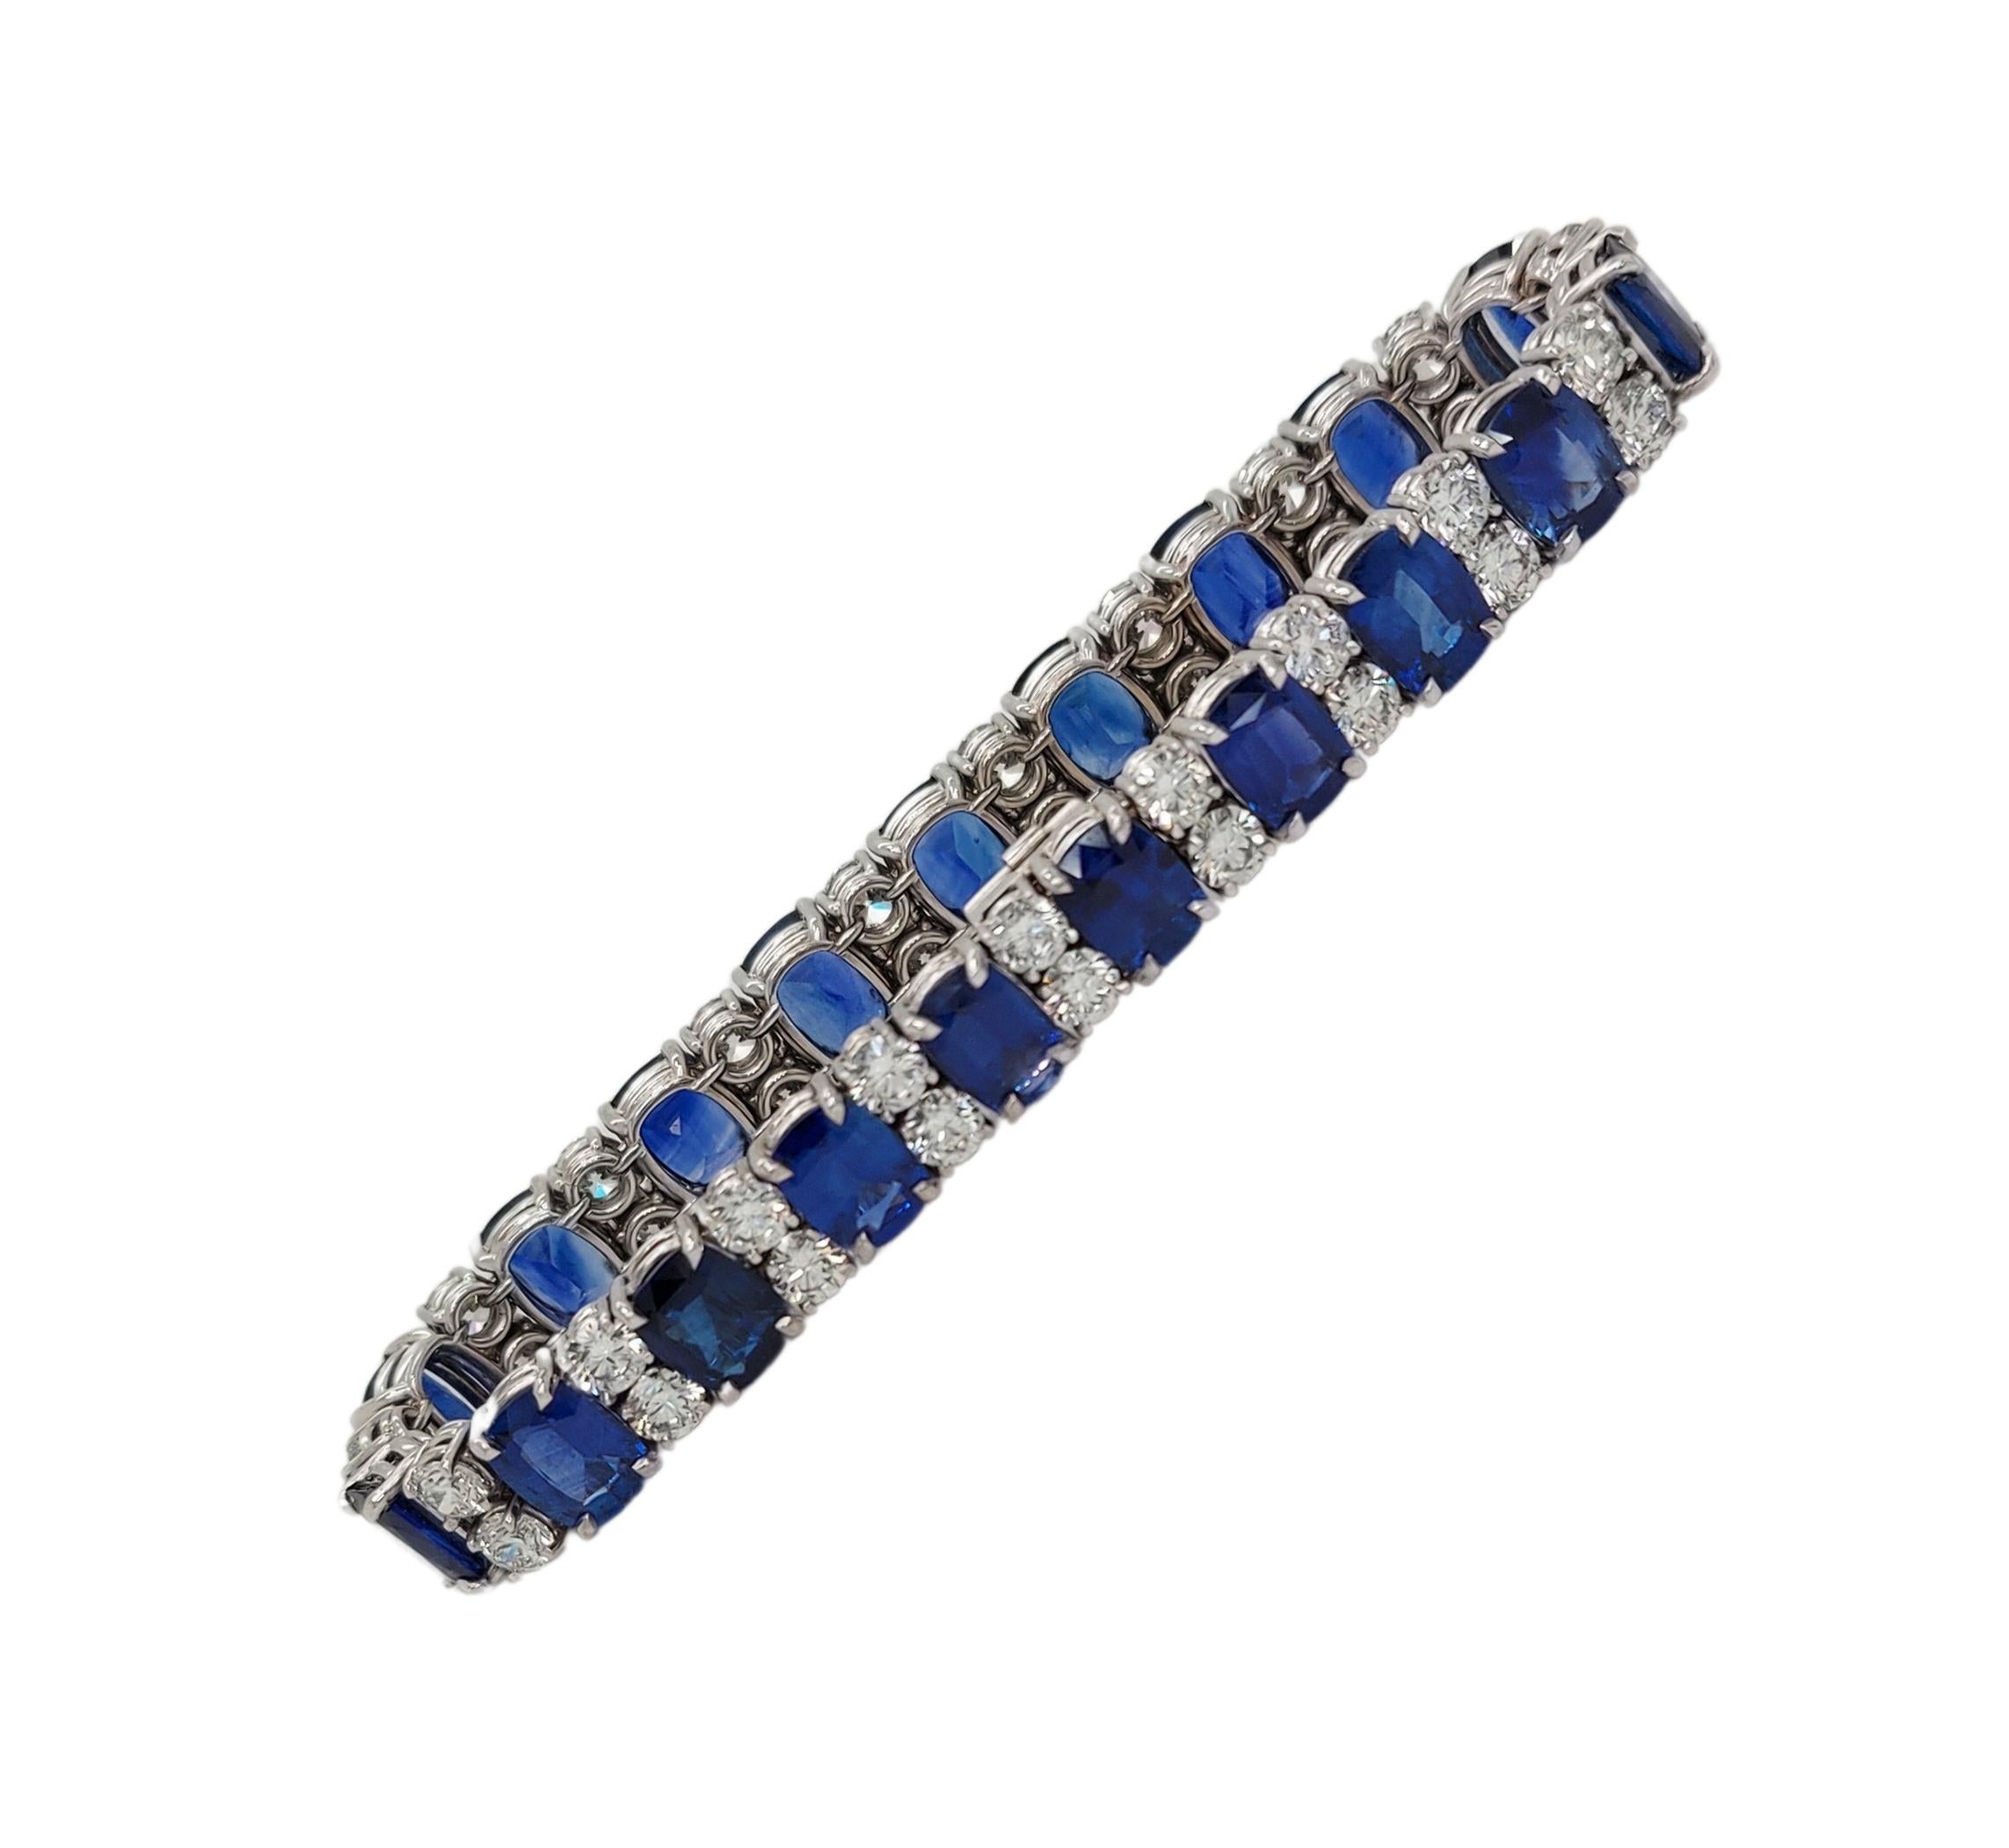 Magnificent Bracelet with sapphires and diamonds ( Can be bought as a set with a gorgeous necklace and earrings)

Sapphires: 19 Vivid blue Ceylon/Madagscar sapphires, together 27.33 ct in total.  Variety of corundum of natural origin, some